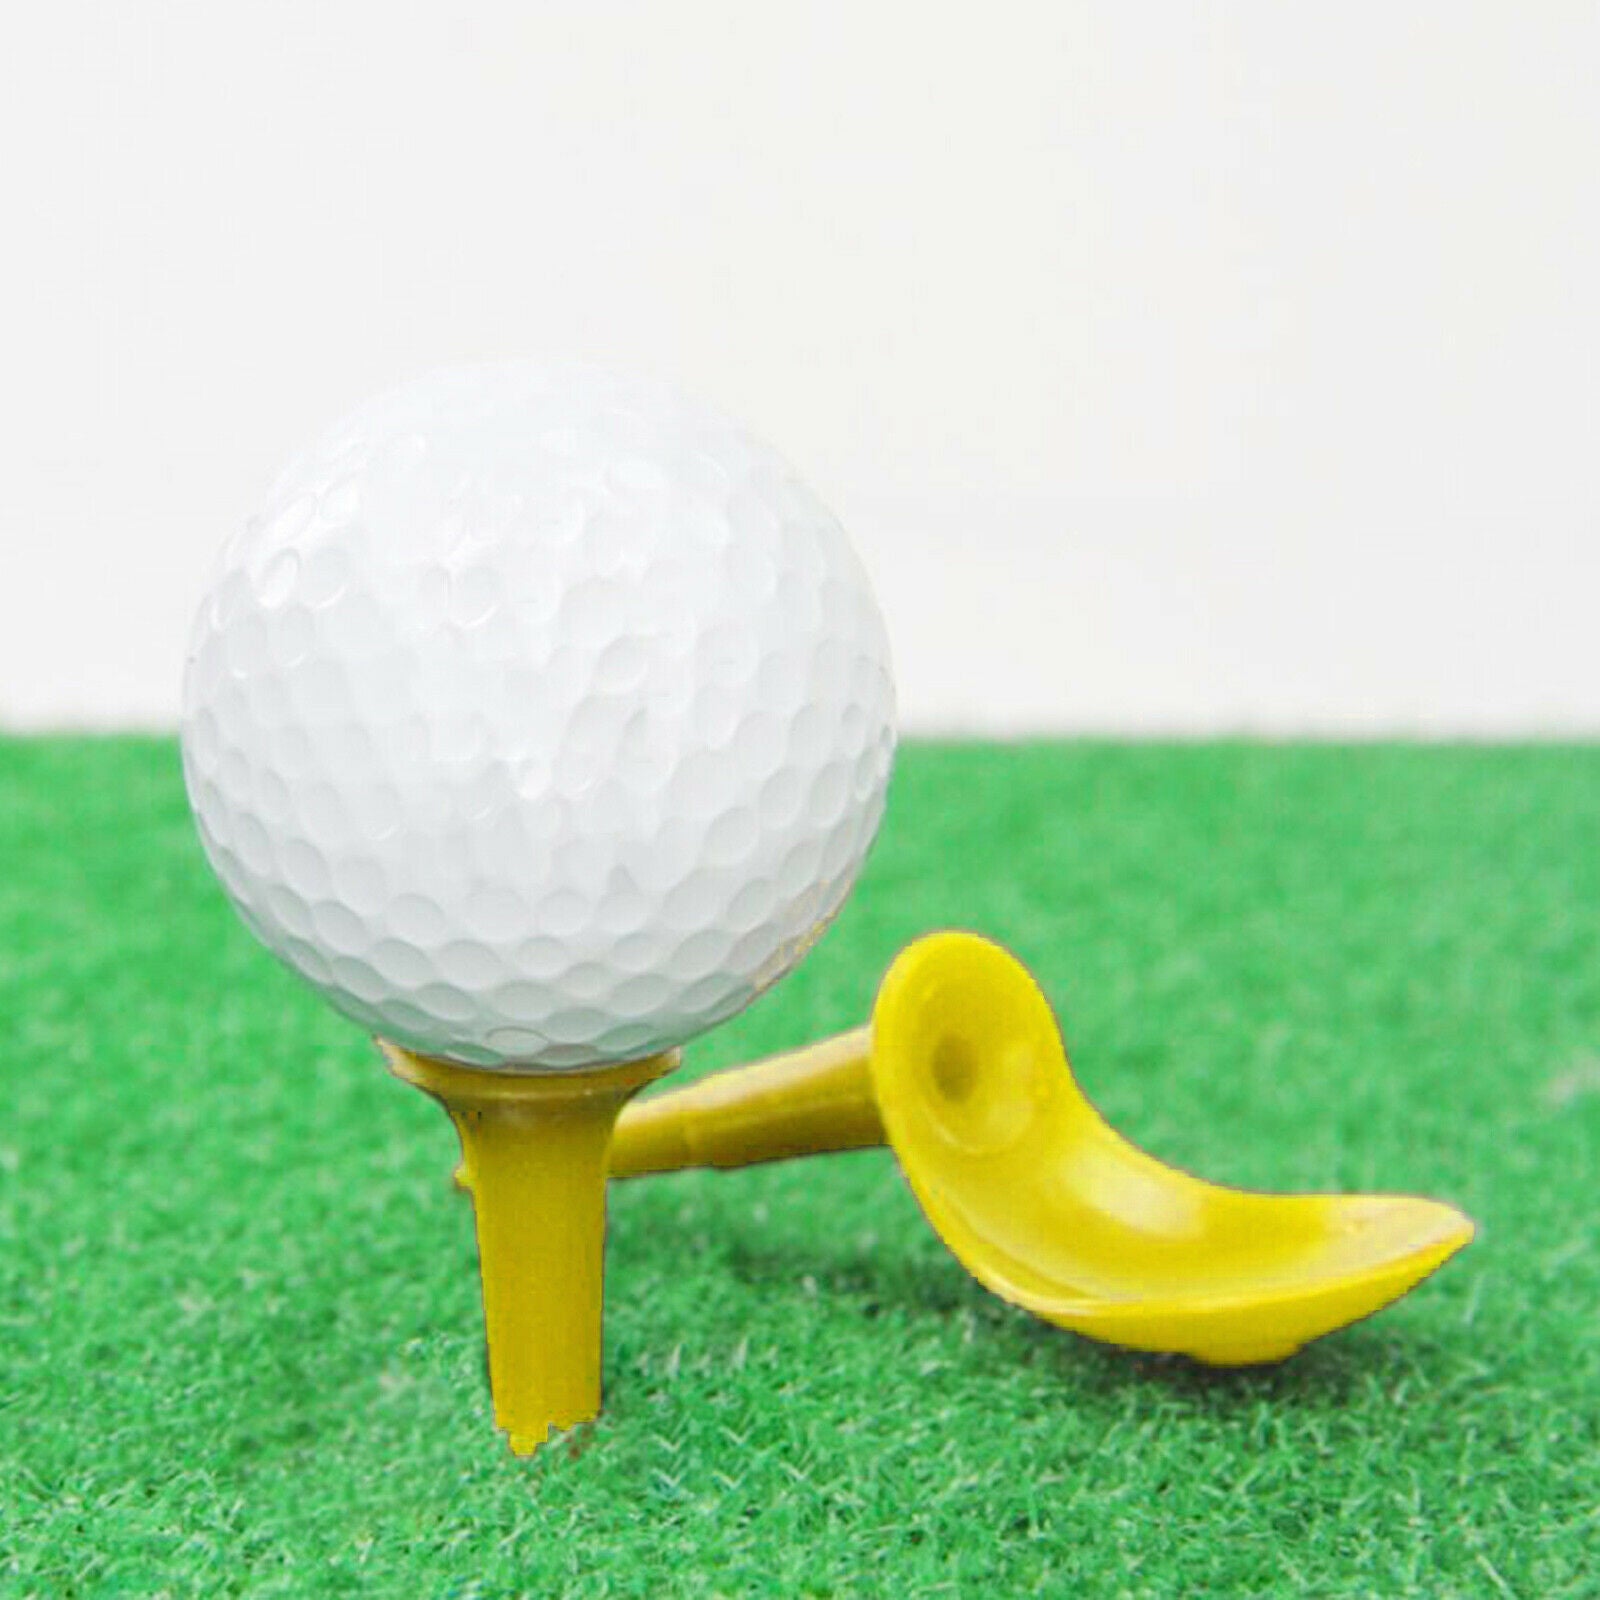 10Pieces Golf Tees Unbreakable Driving Range Training Beginners Yellow